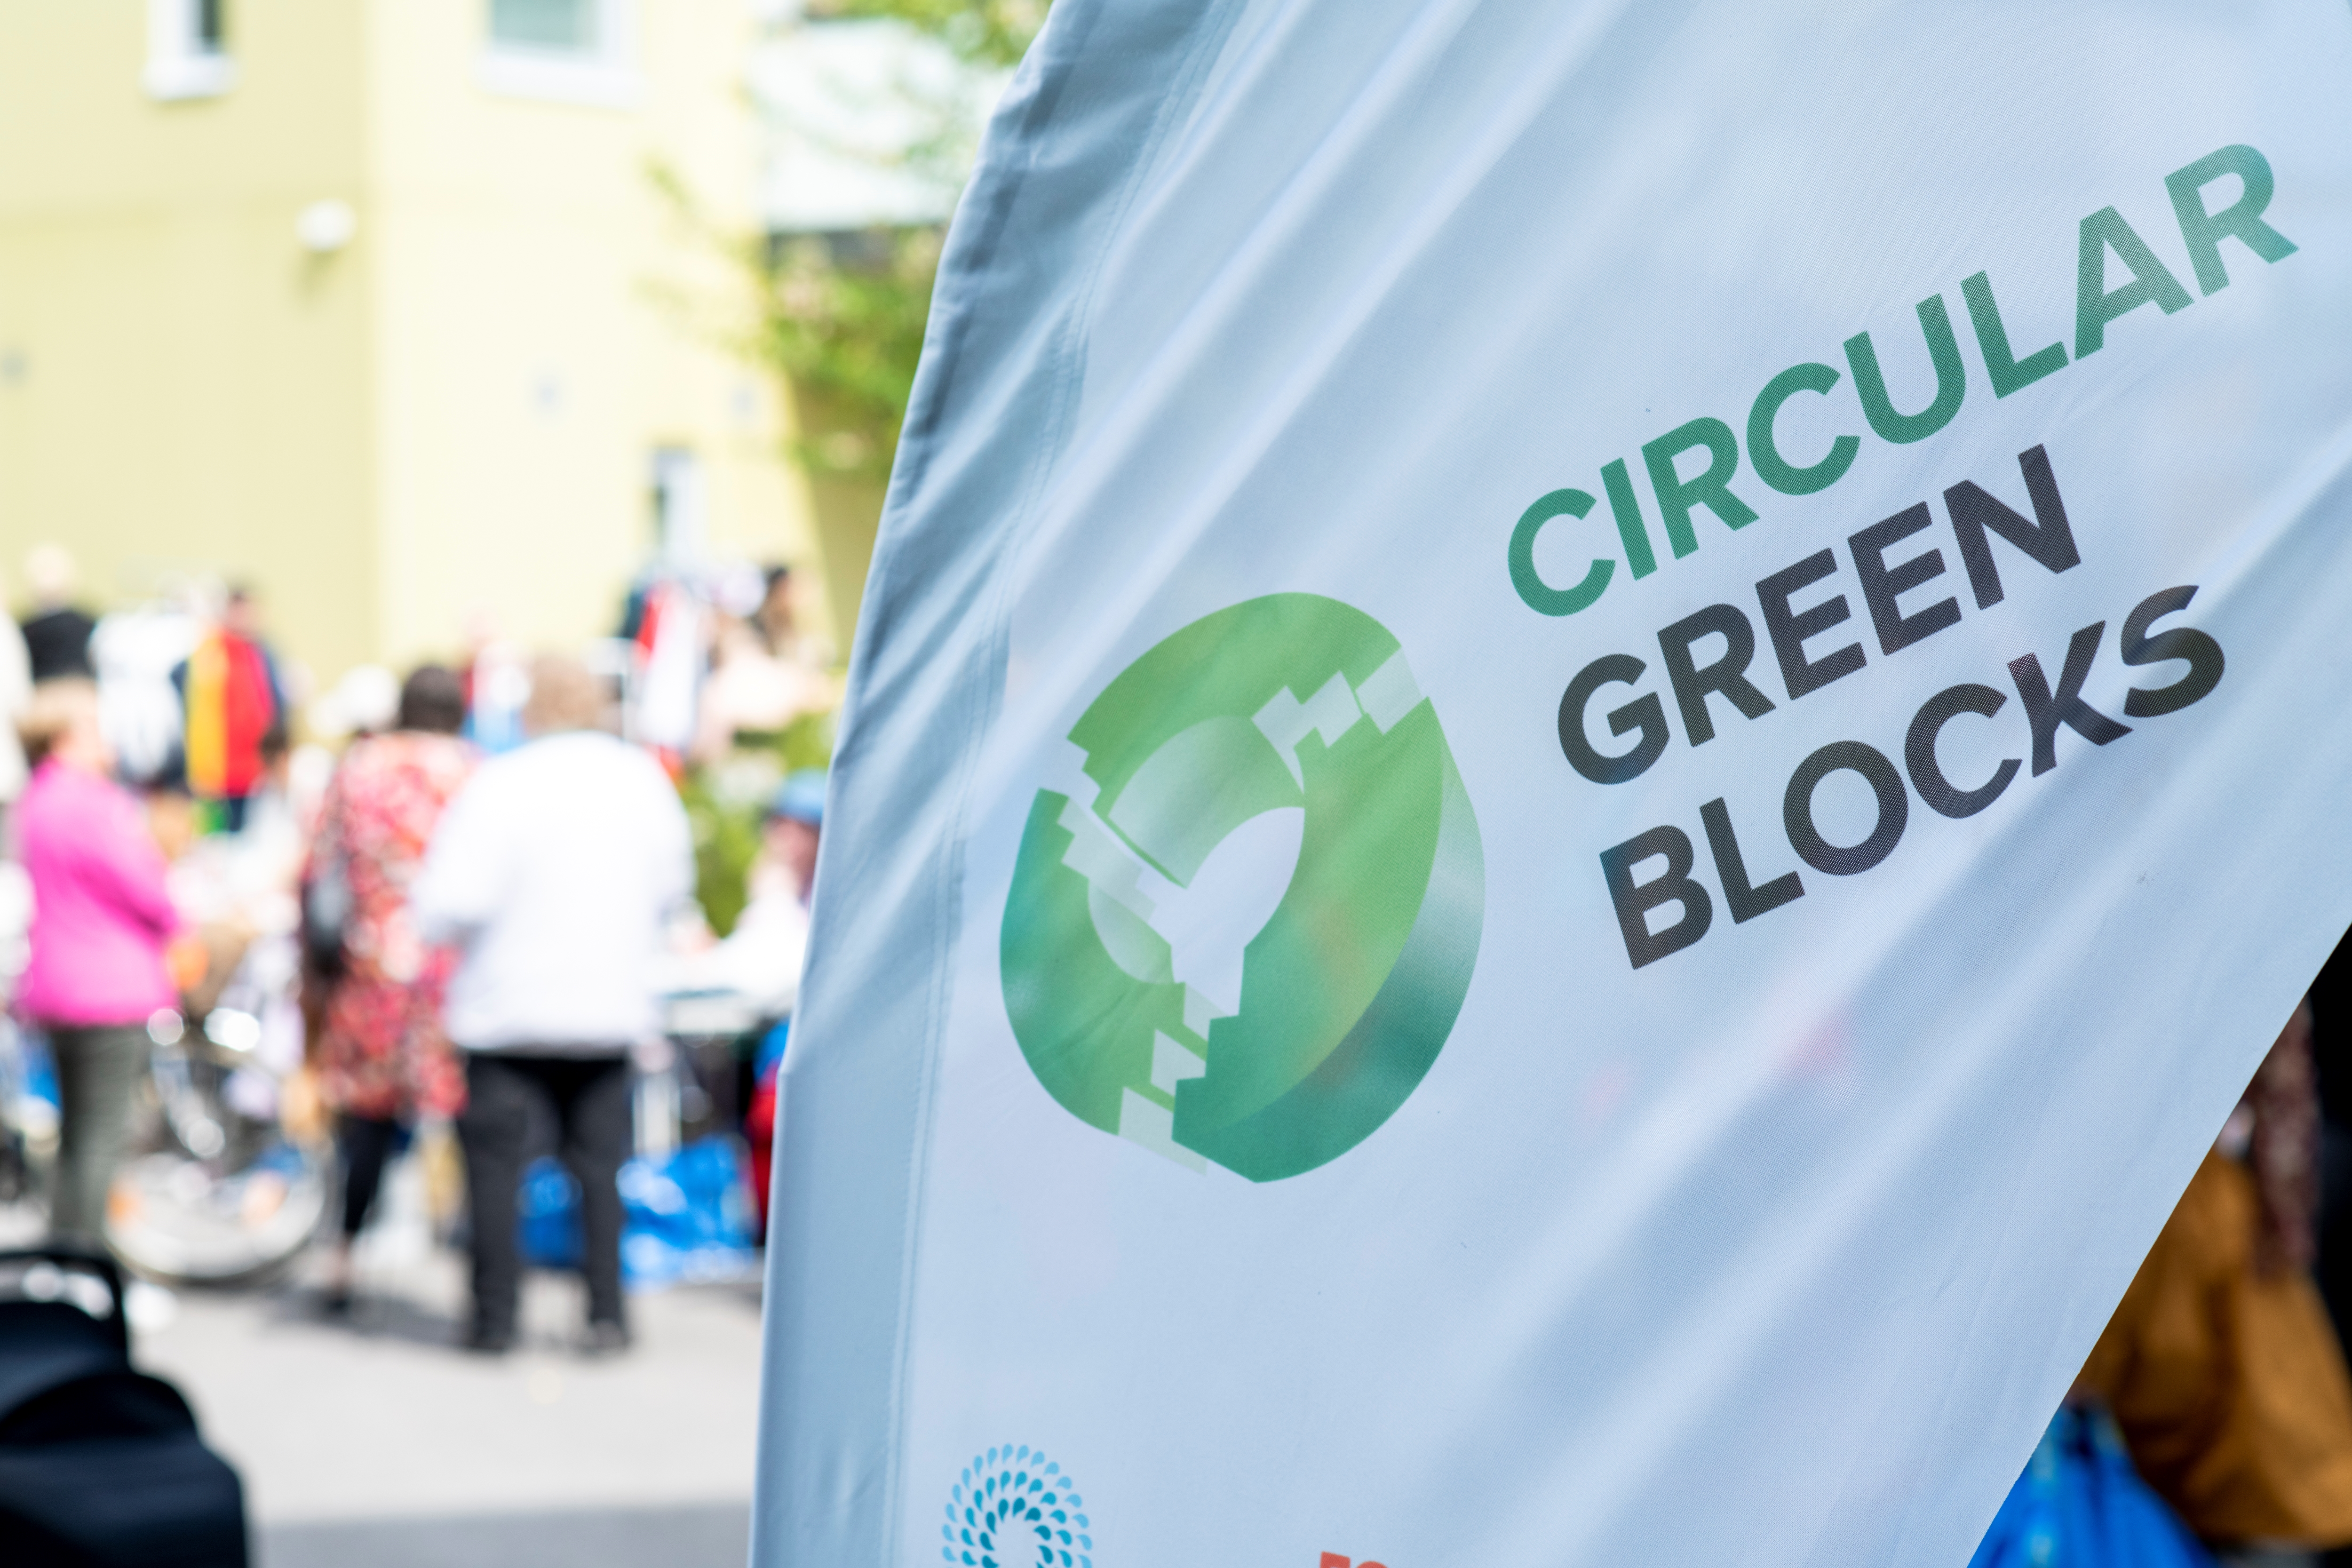 A photo of an outdoor event organised by the Circular Green Blocks team.